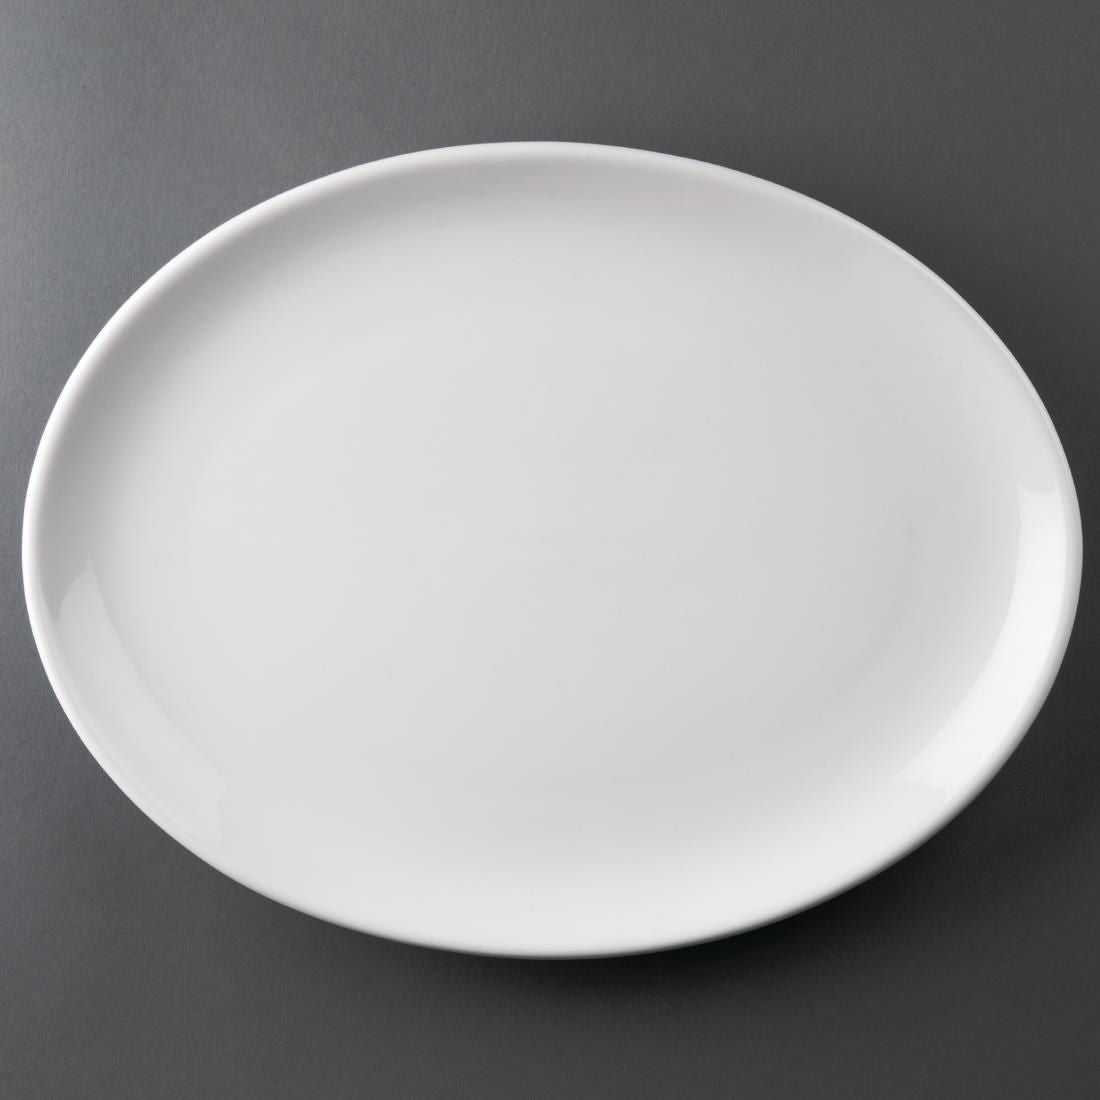 Athena Hotelware Oval Coupe Plates 305 x 241 mm (Pack of 6) JD Catering Equipment Solutions Ltd